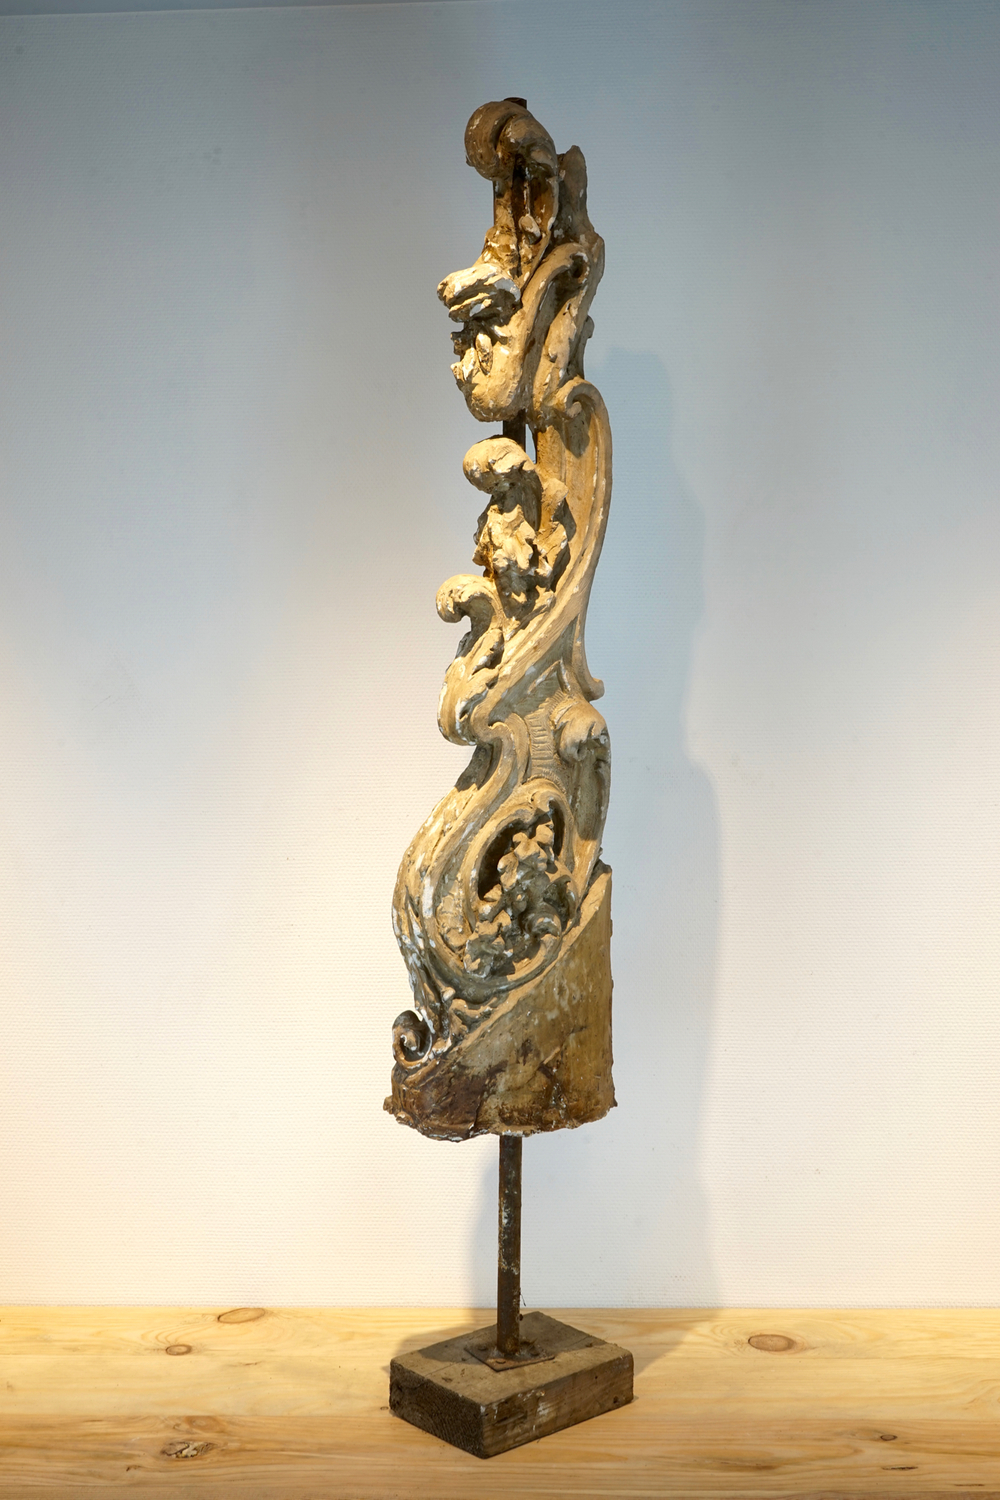 A plaster cast of a baroque ornament on stand, 19/20th C., Bruges